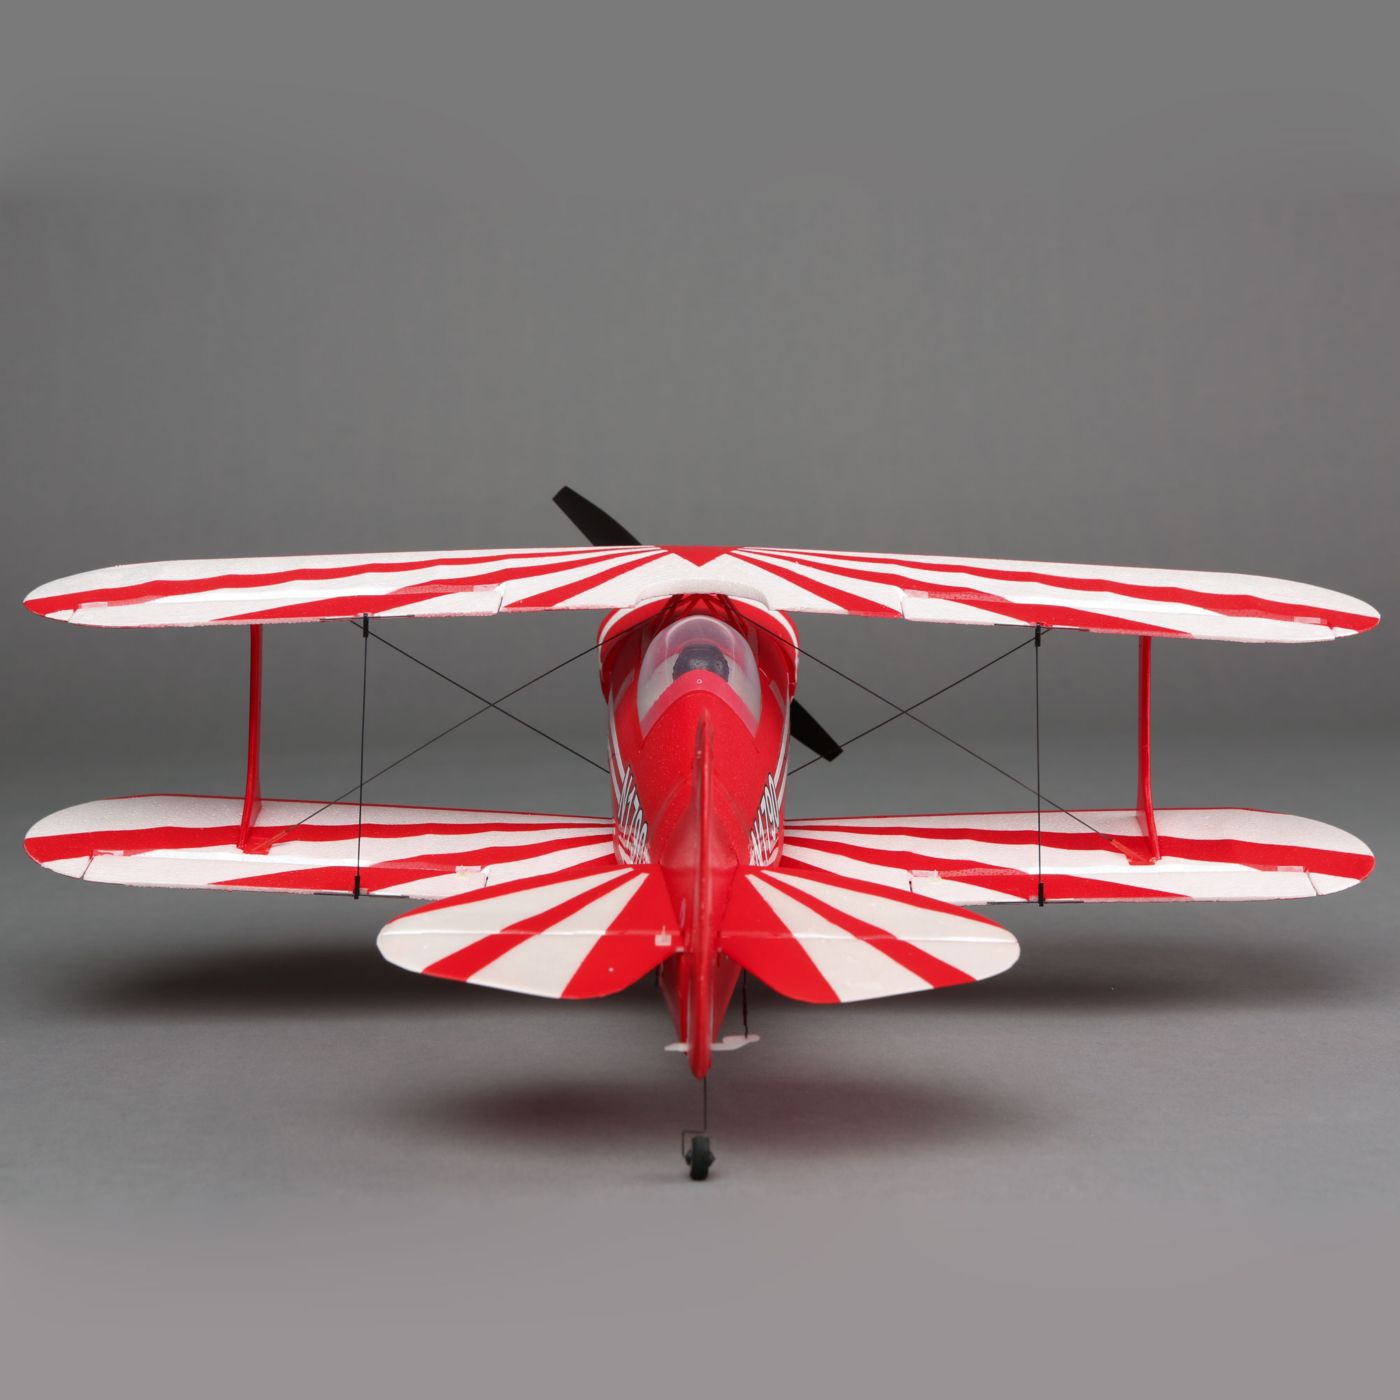 electric flying model airplanes